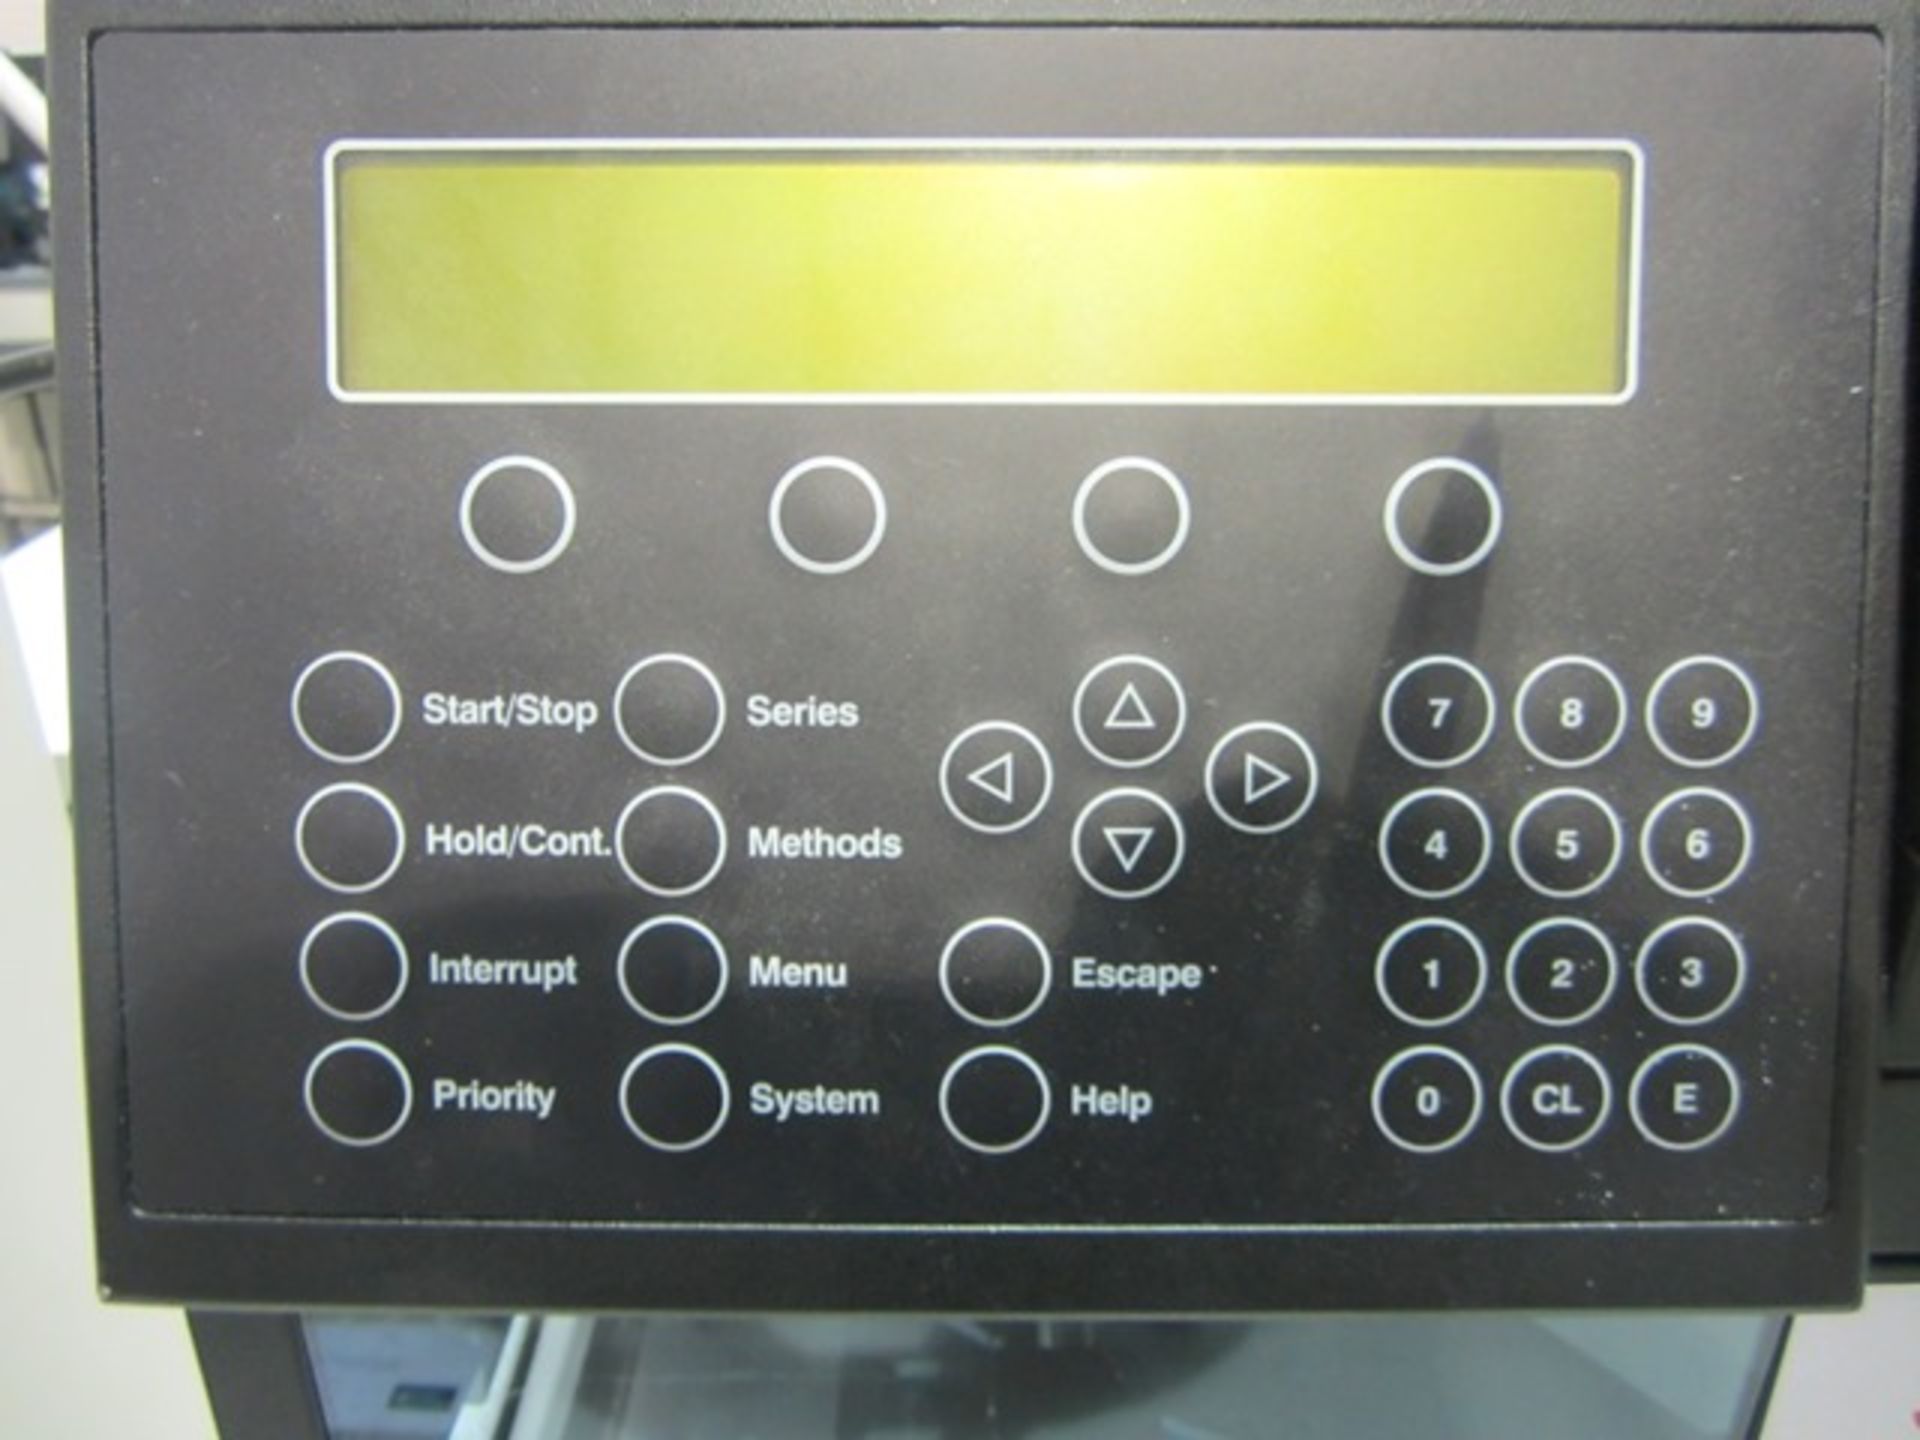 Dionex LC Packing Famos autosampler: STH585, UVD 340U, chromatography interface UC1-1000, P580 - Image 2 of 2